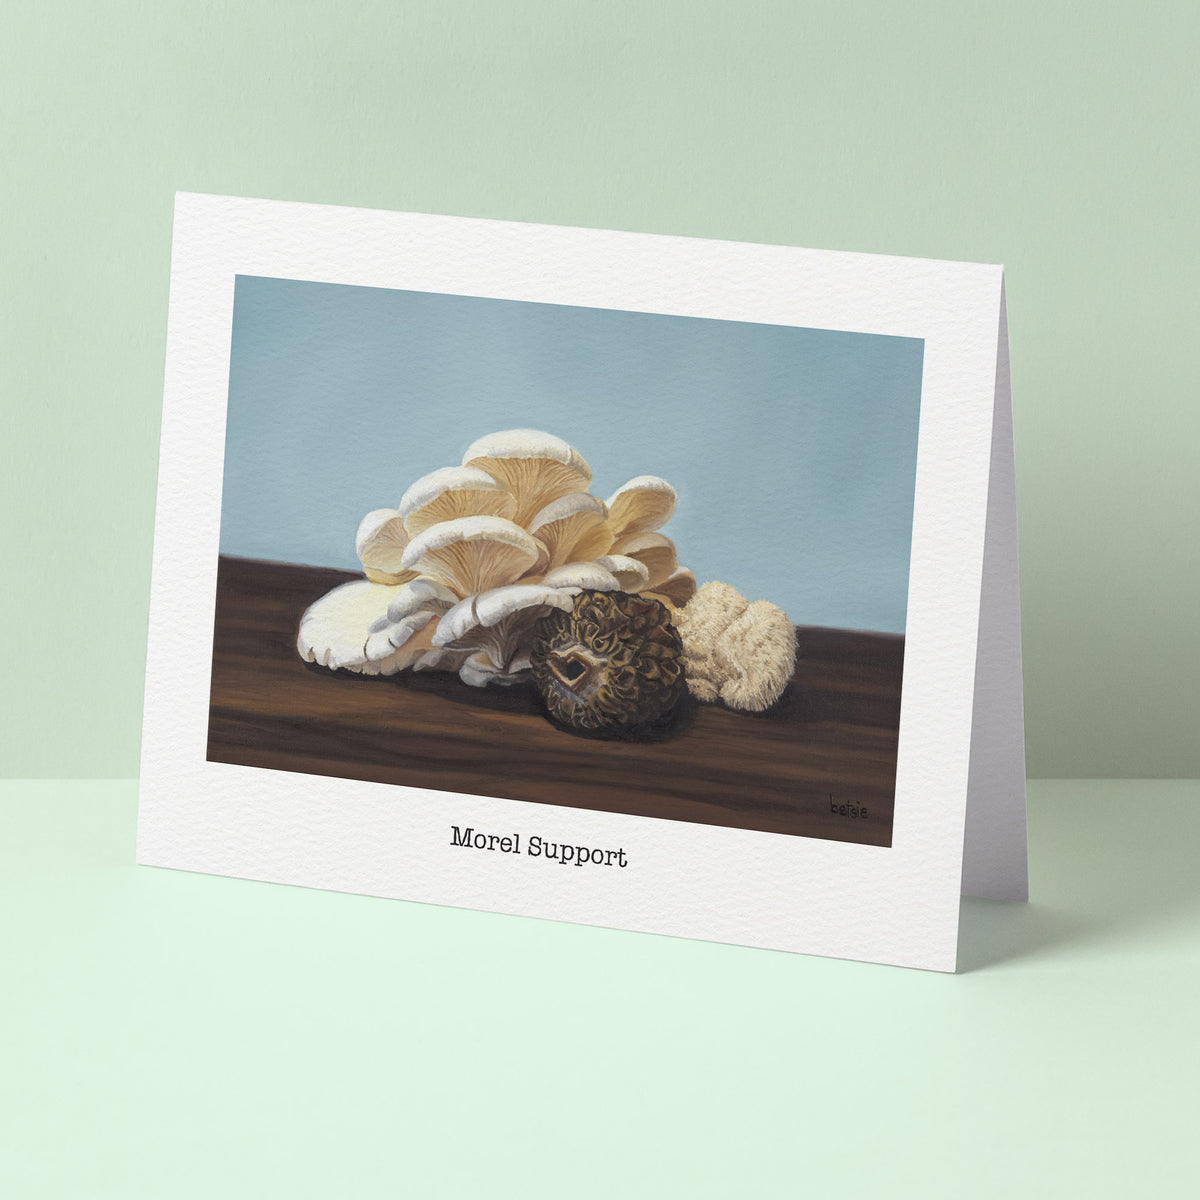 "Morel Support" Greeting Card